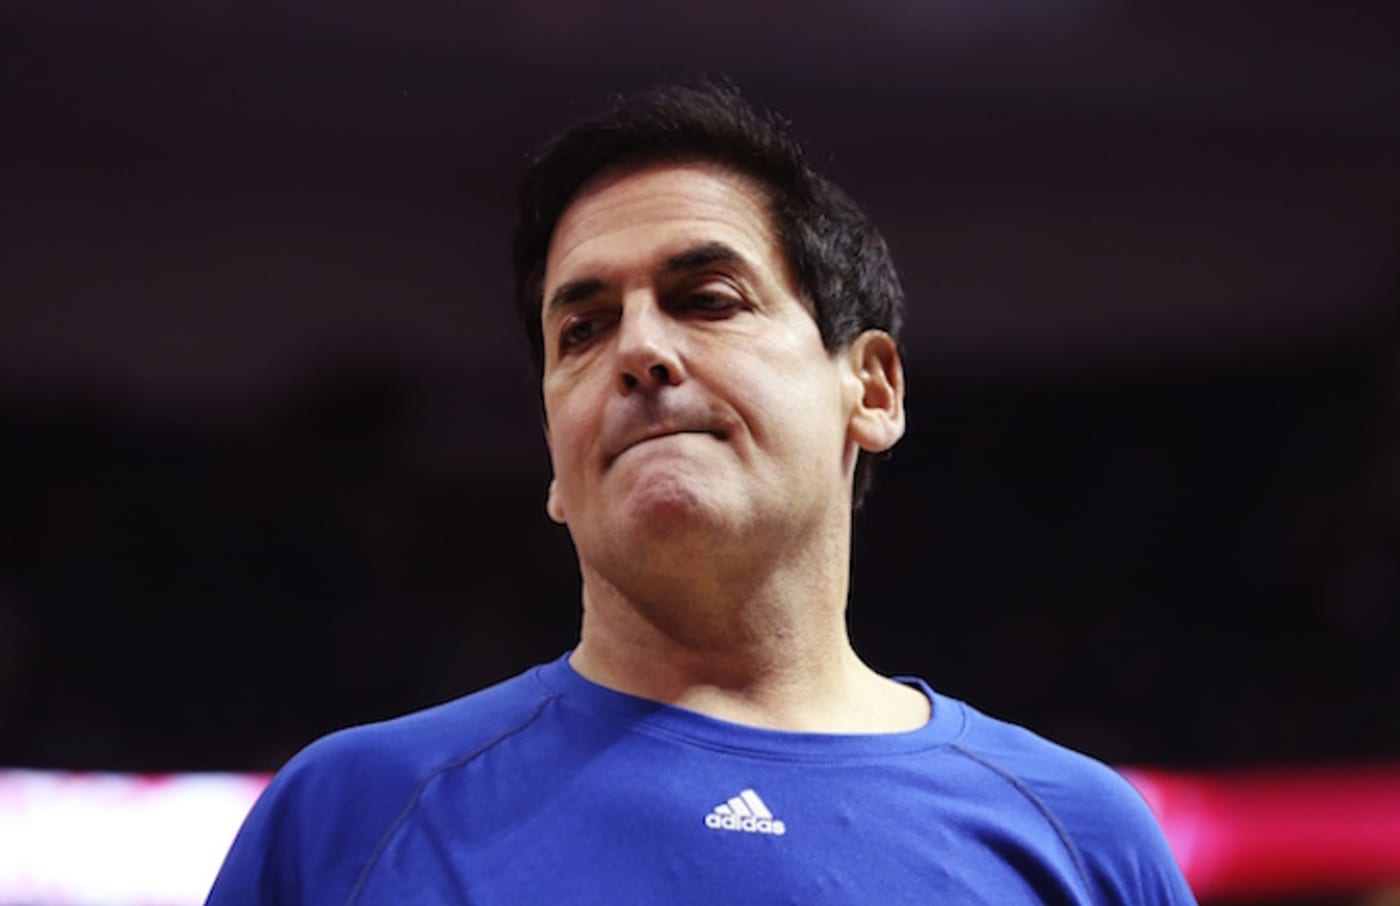 Mark Cuban realizing how bad the Mavericks are going to be this season.